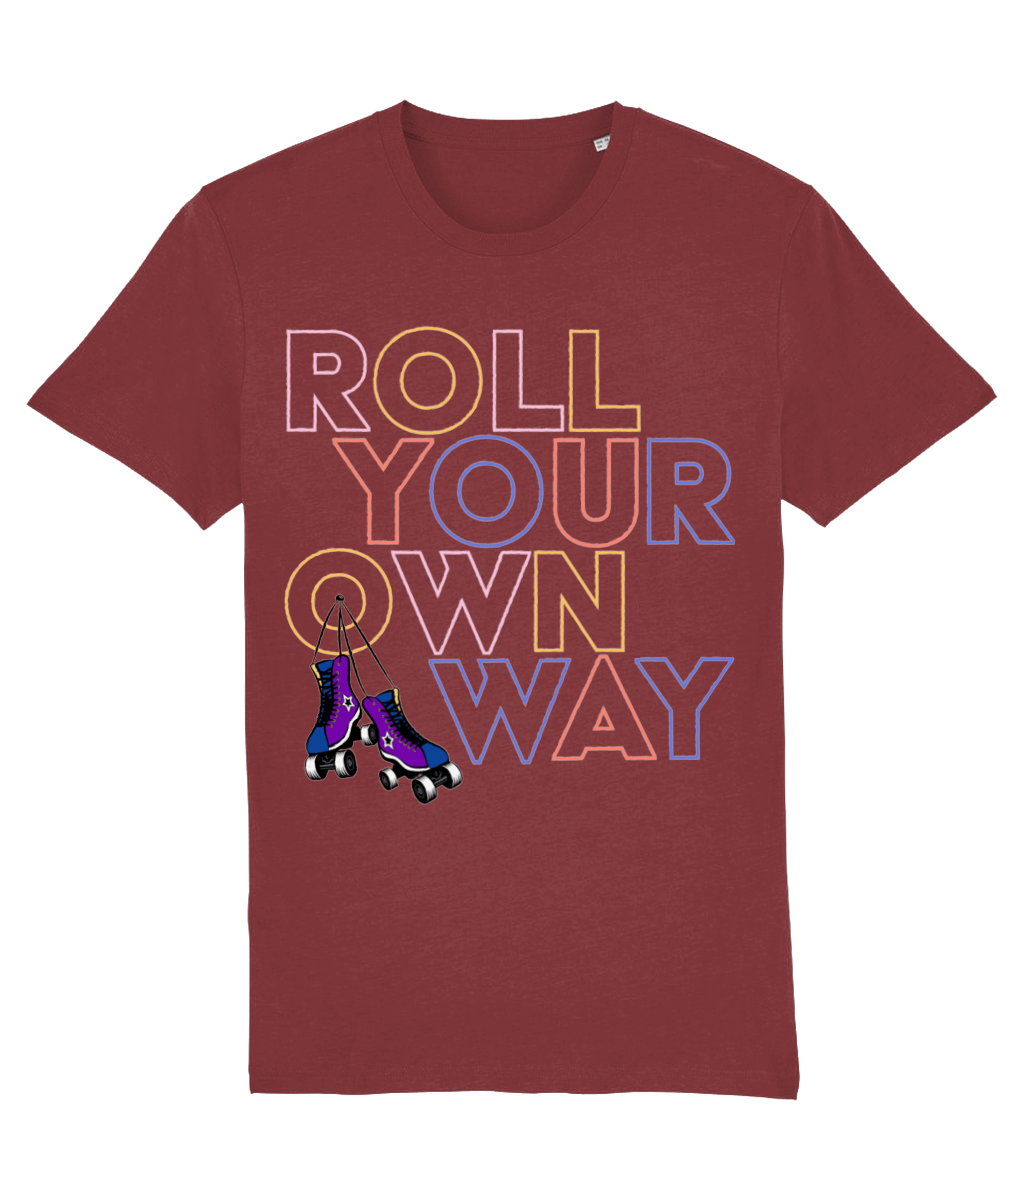 Tshirt Roll Your Own Way